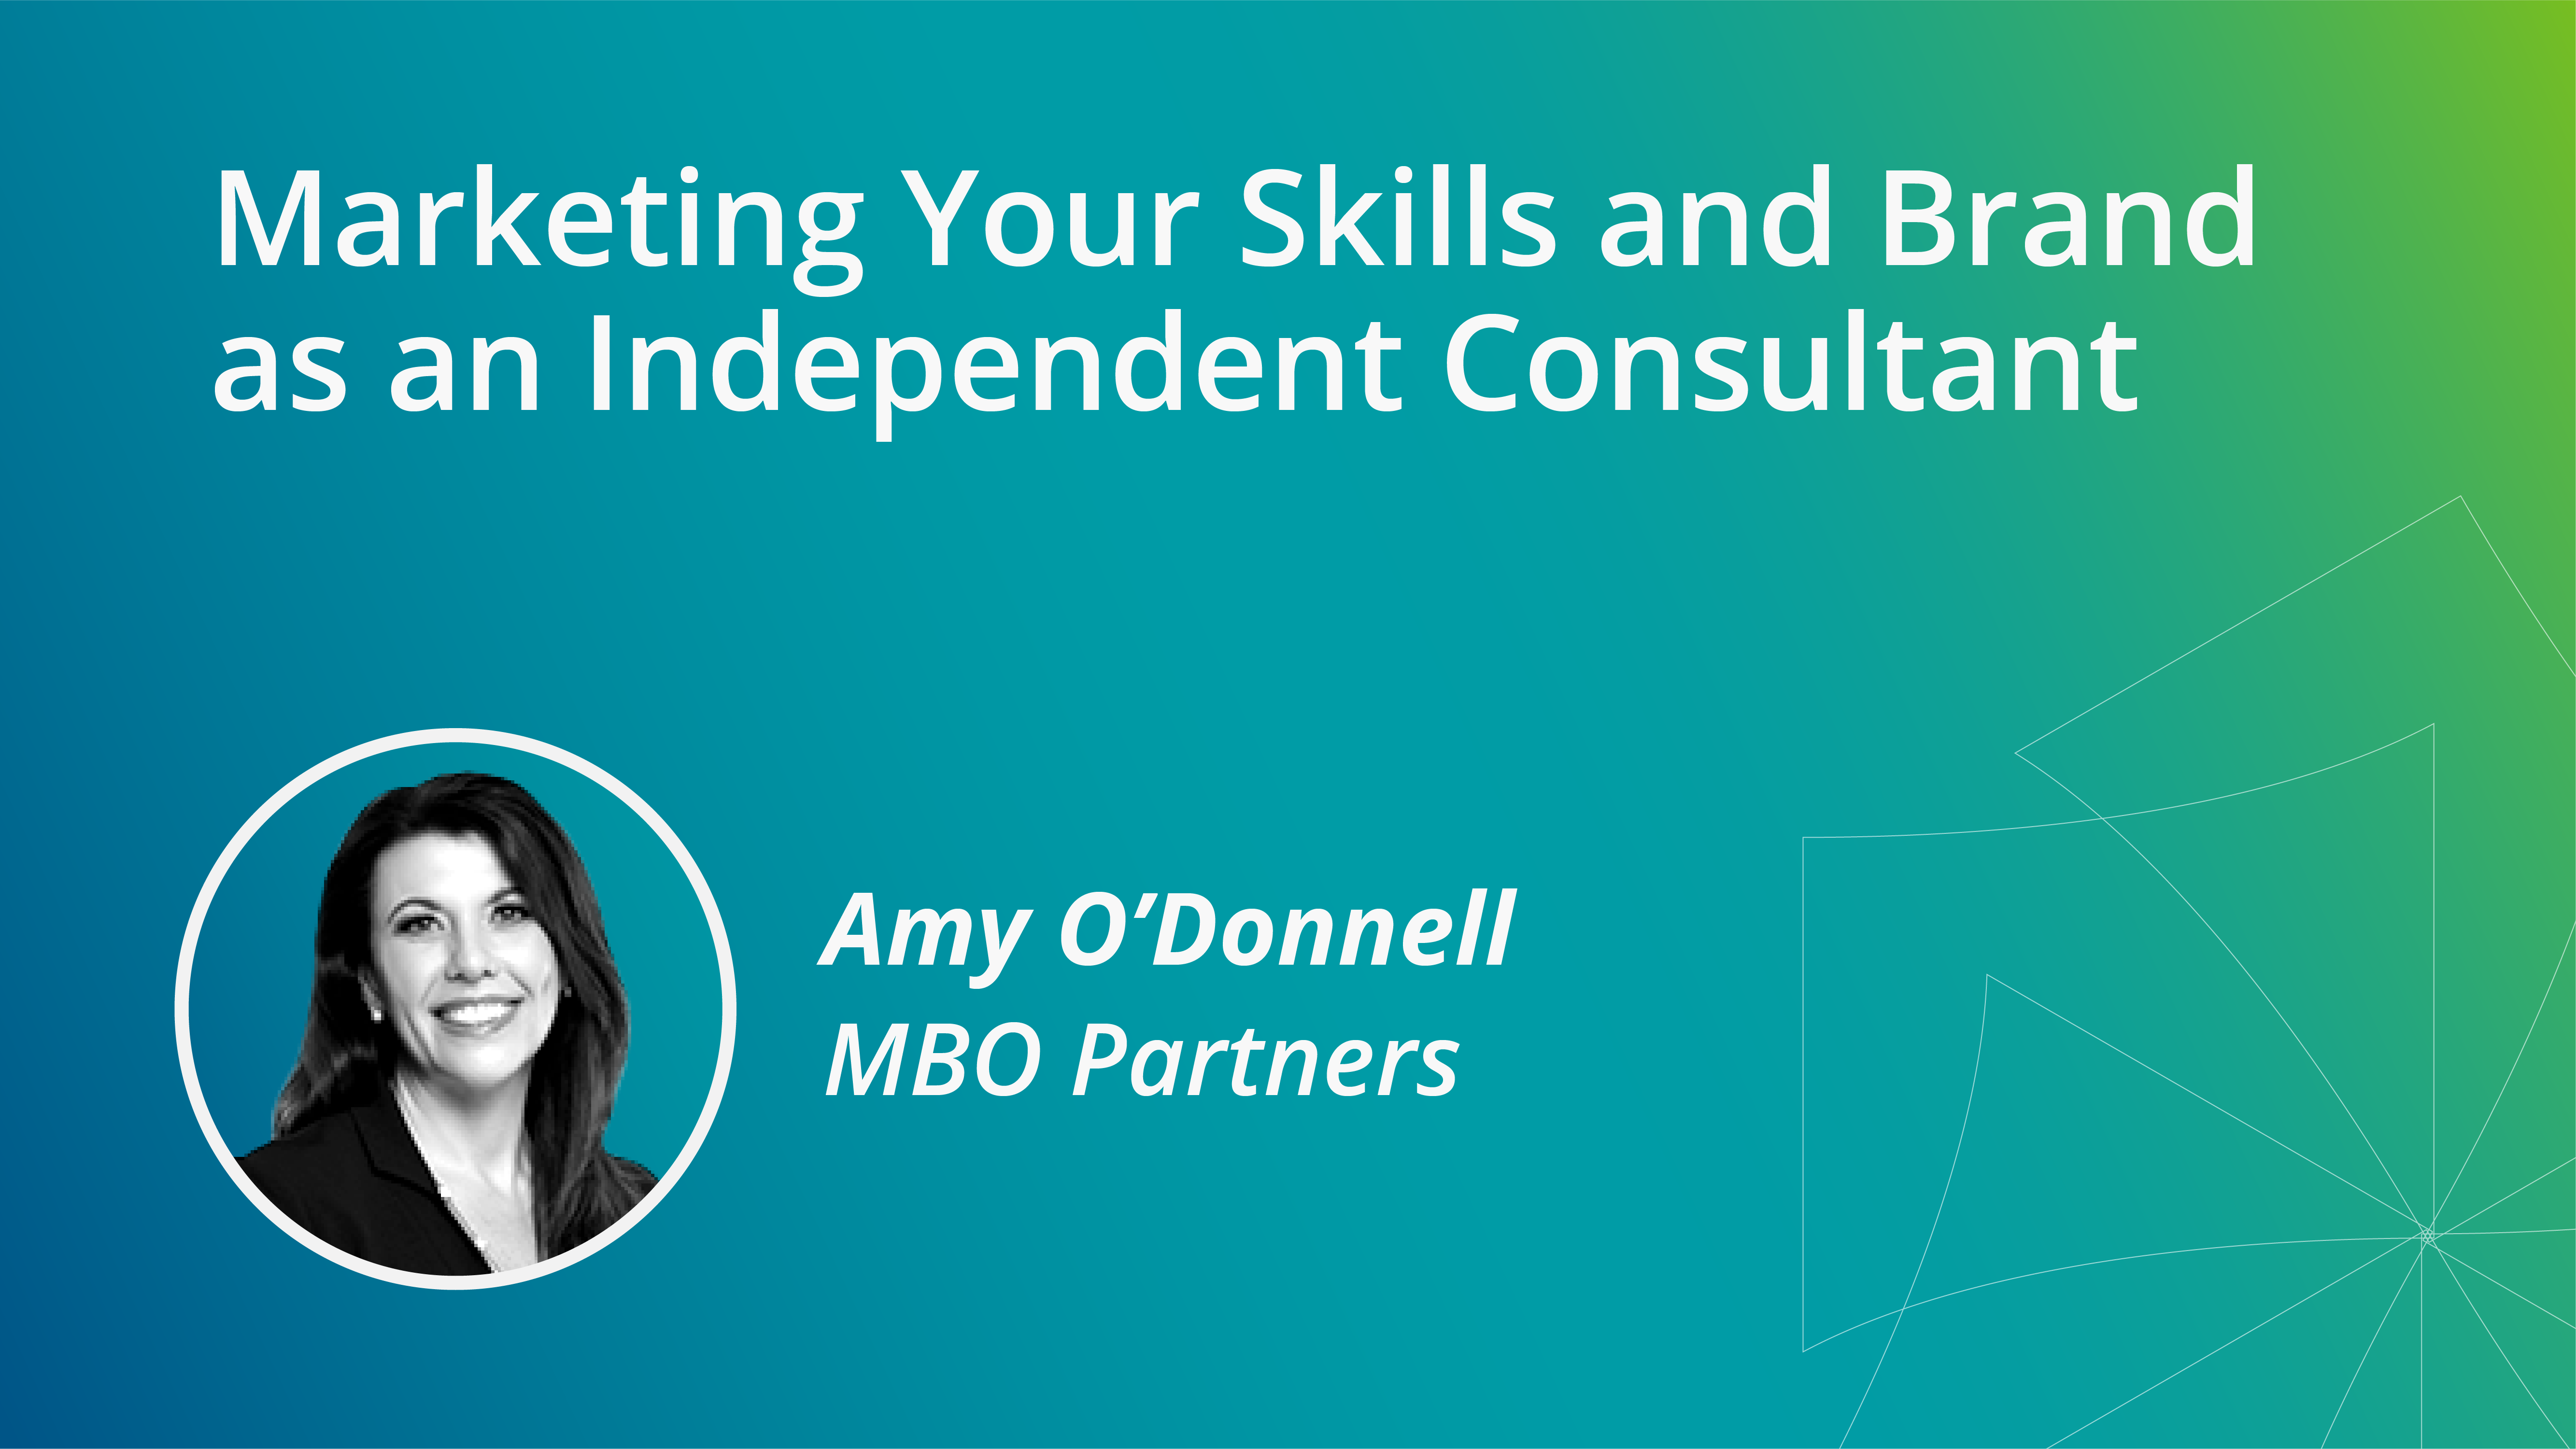 Marketing Your Skills and Brand as an Independent Consultant